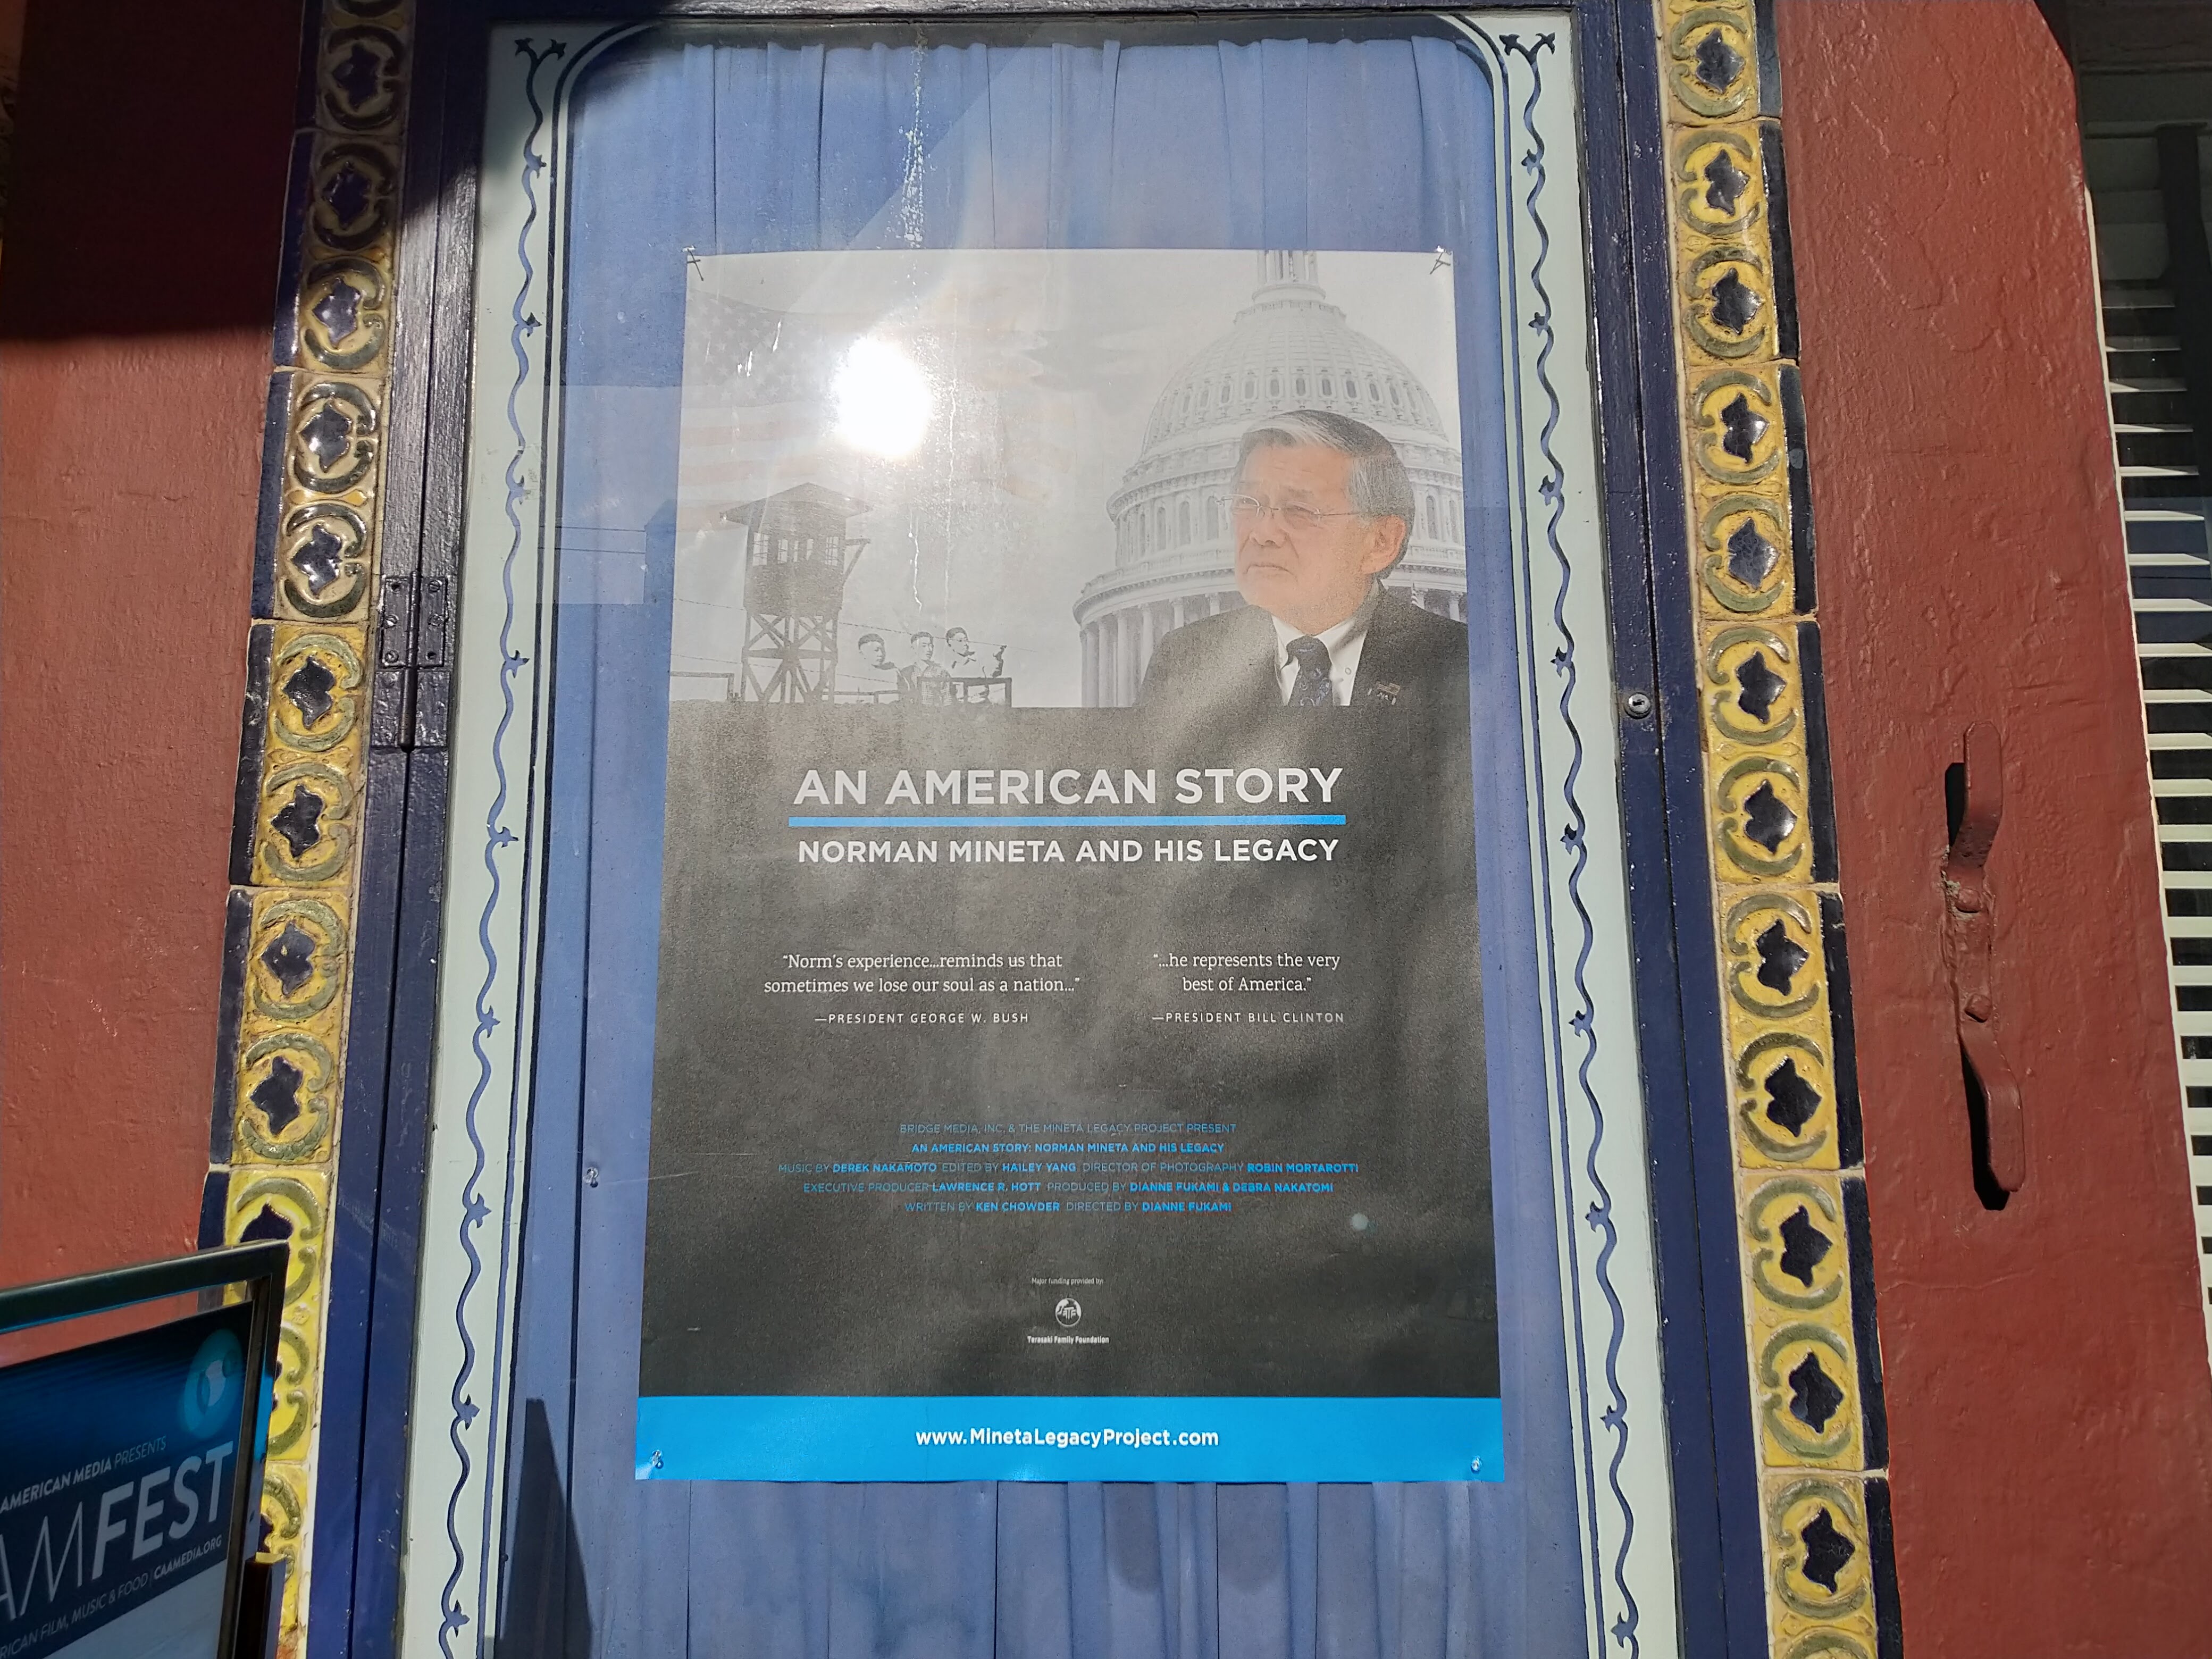 CAAMFEST36: Opening Night Film & Gala Red Carpet Premiere of 'An American Story: Norman Mineta'